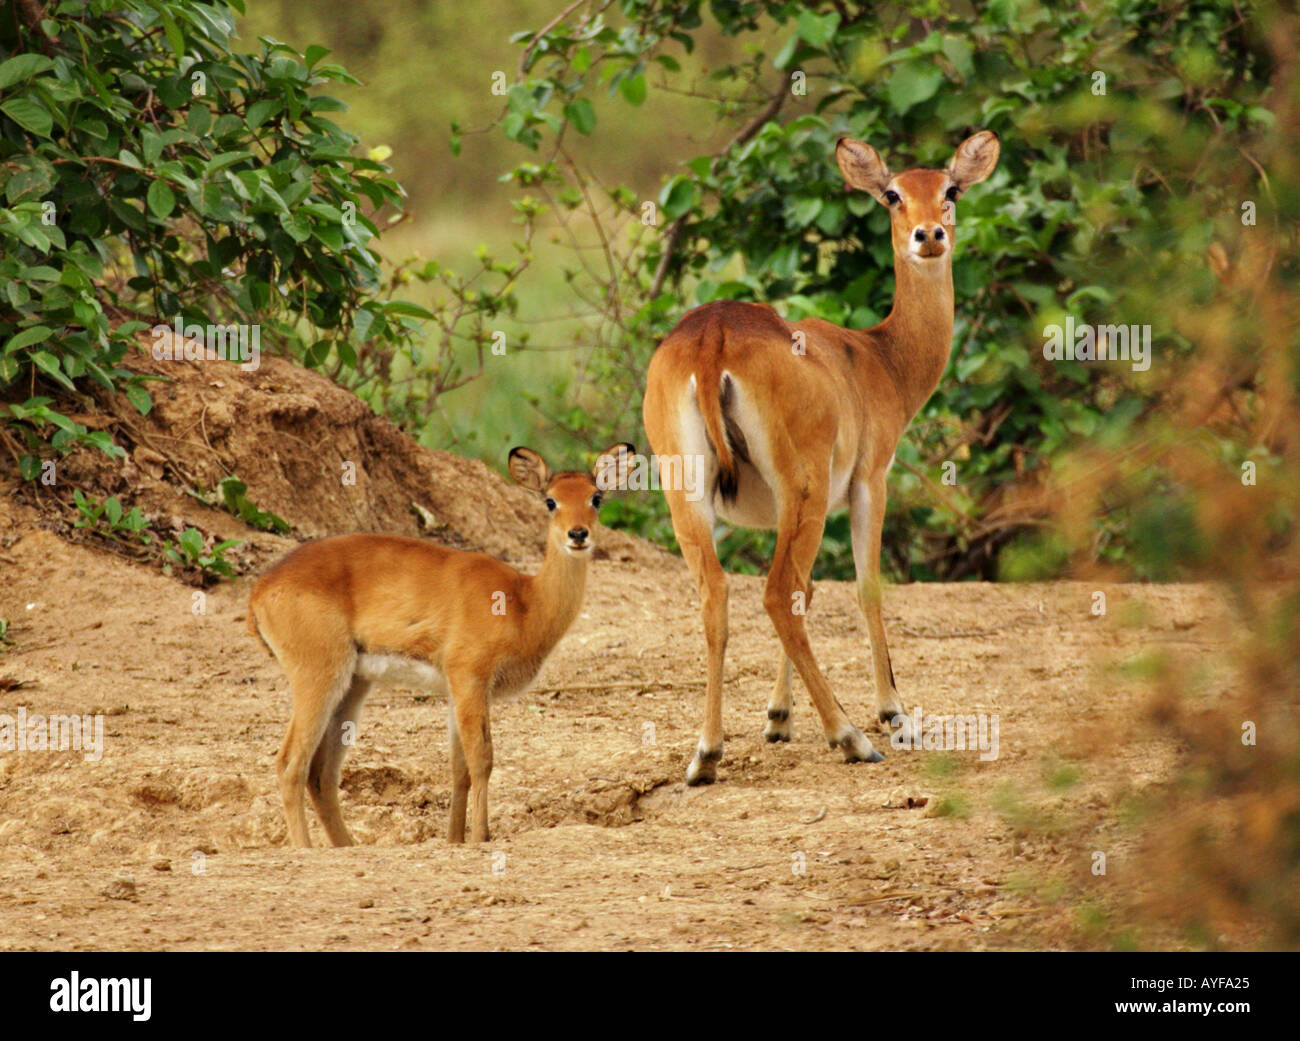 Kob hind and fawn disturbed at a salt lick Mole National Park Northern Ghana Stock Photo